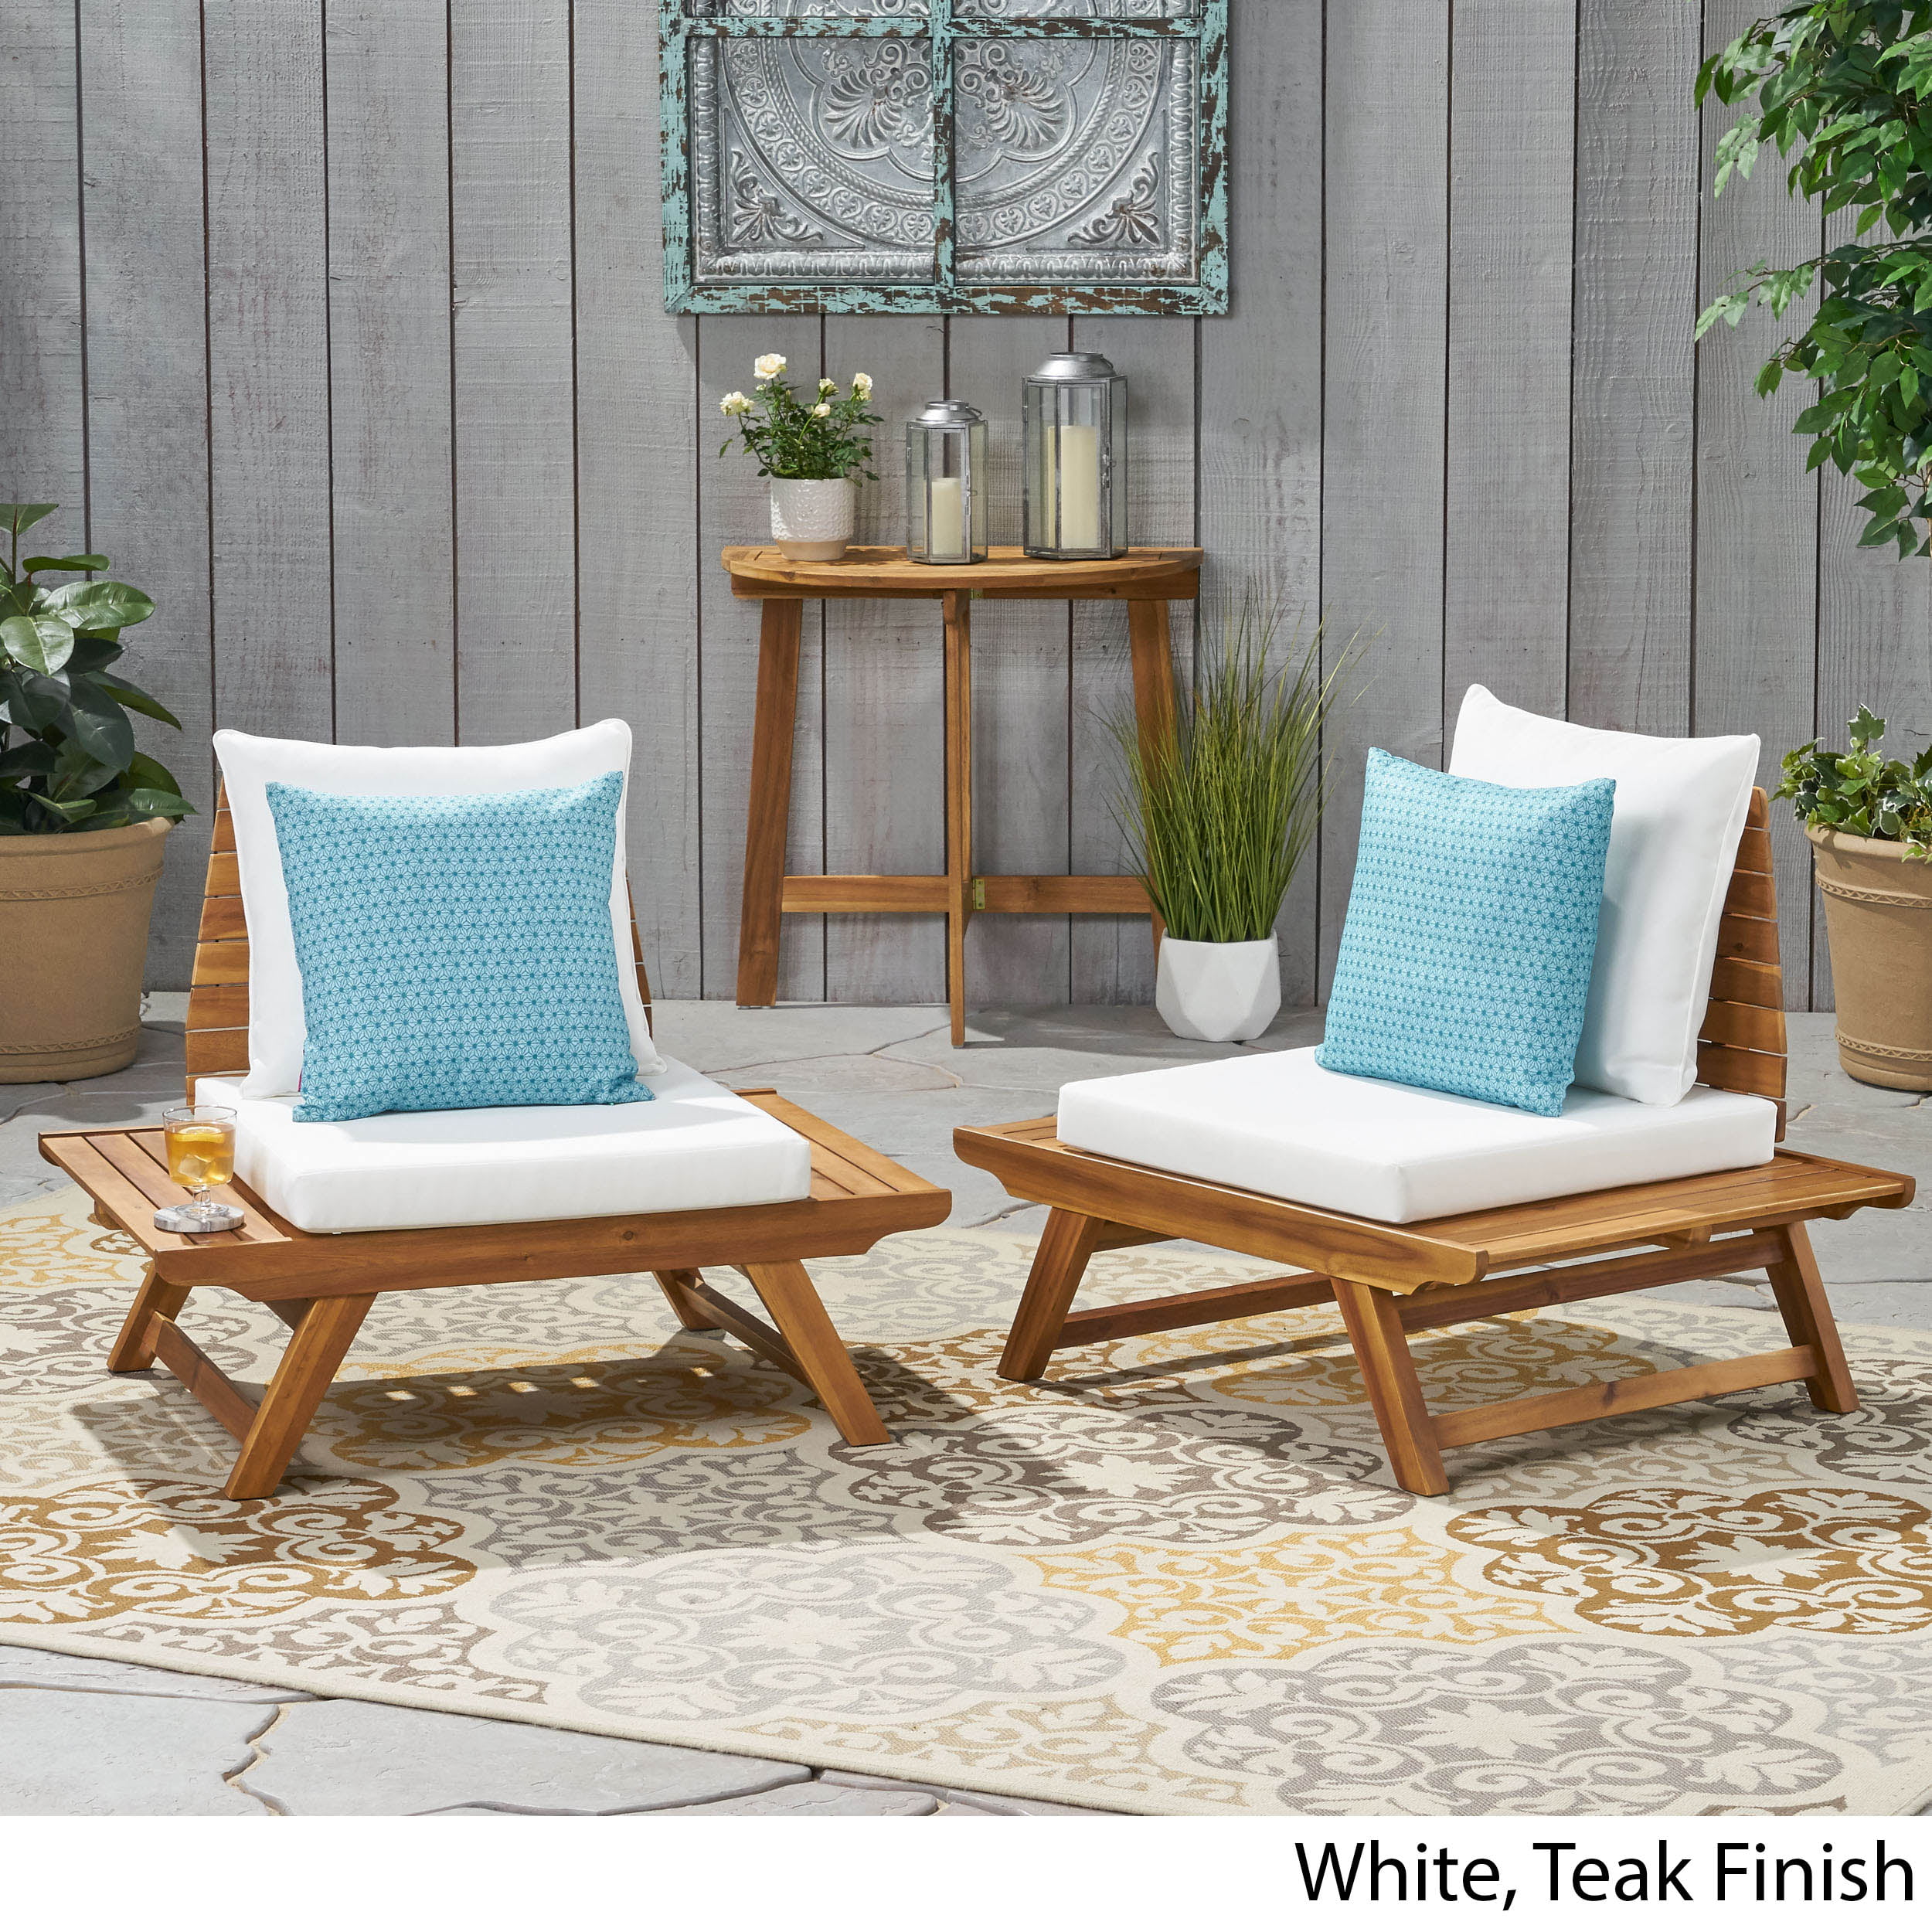 Kaiya Outdoor Wooden Club Chairs With, Outdoor Wood Furniture With Cushions